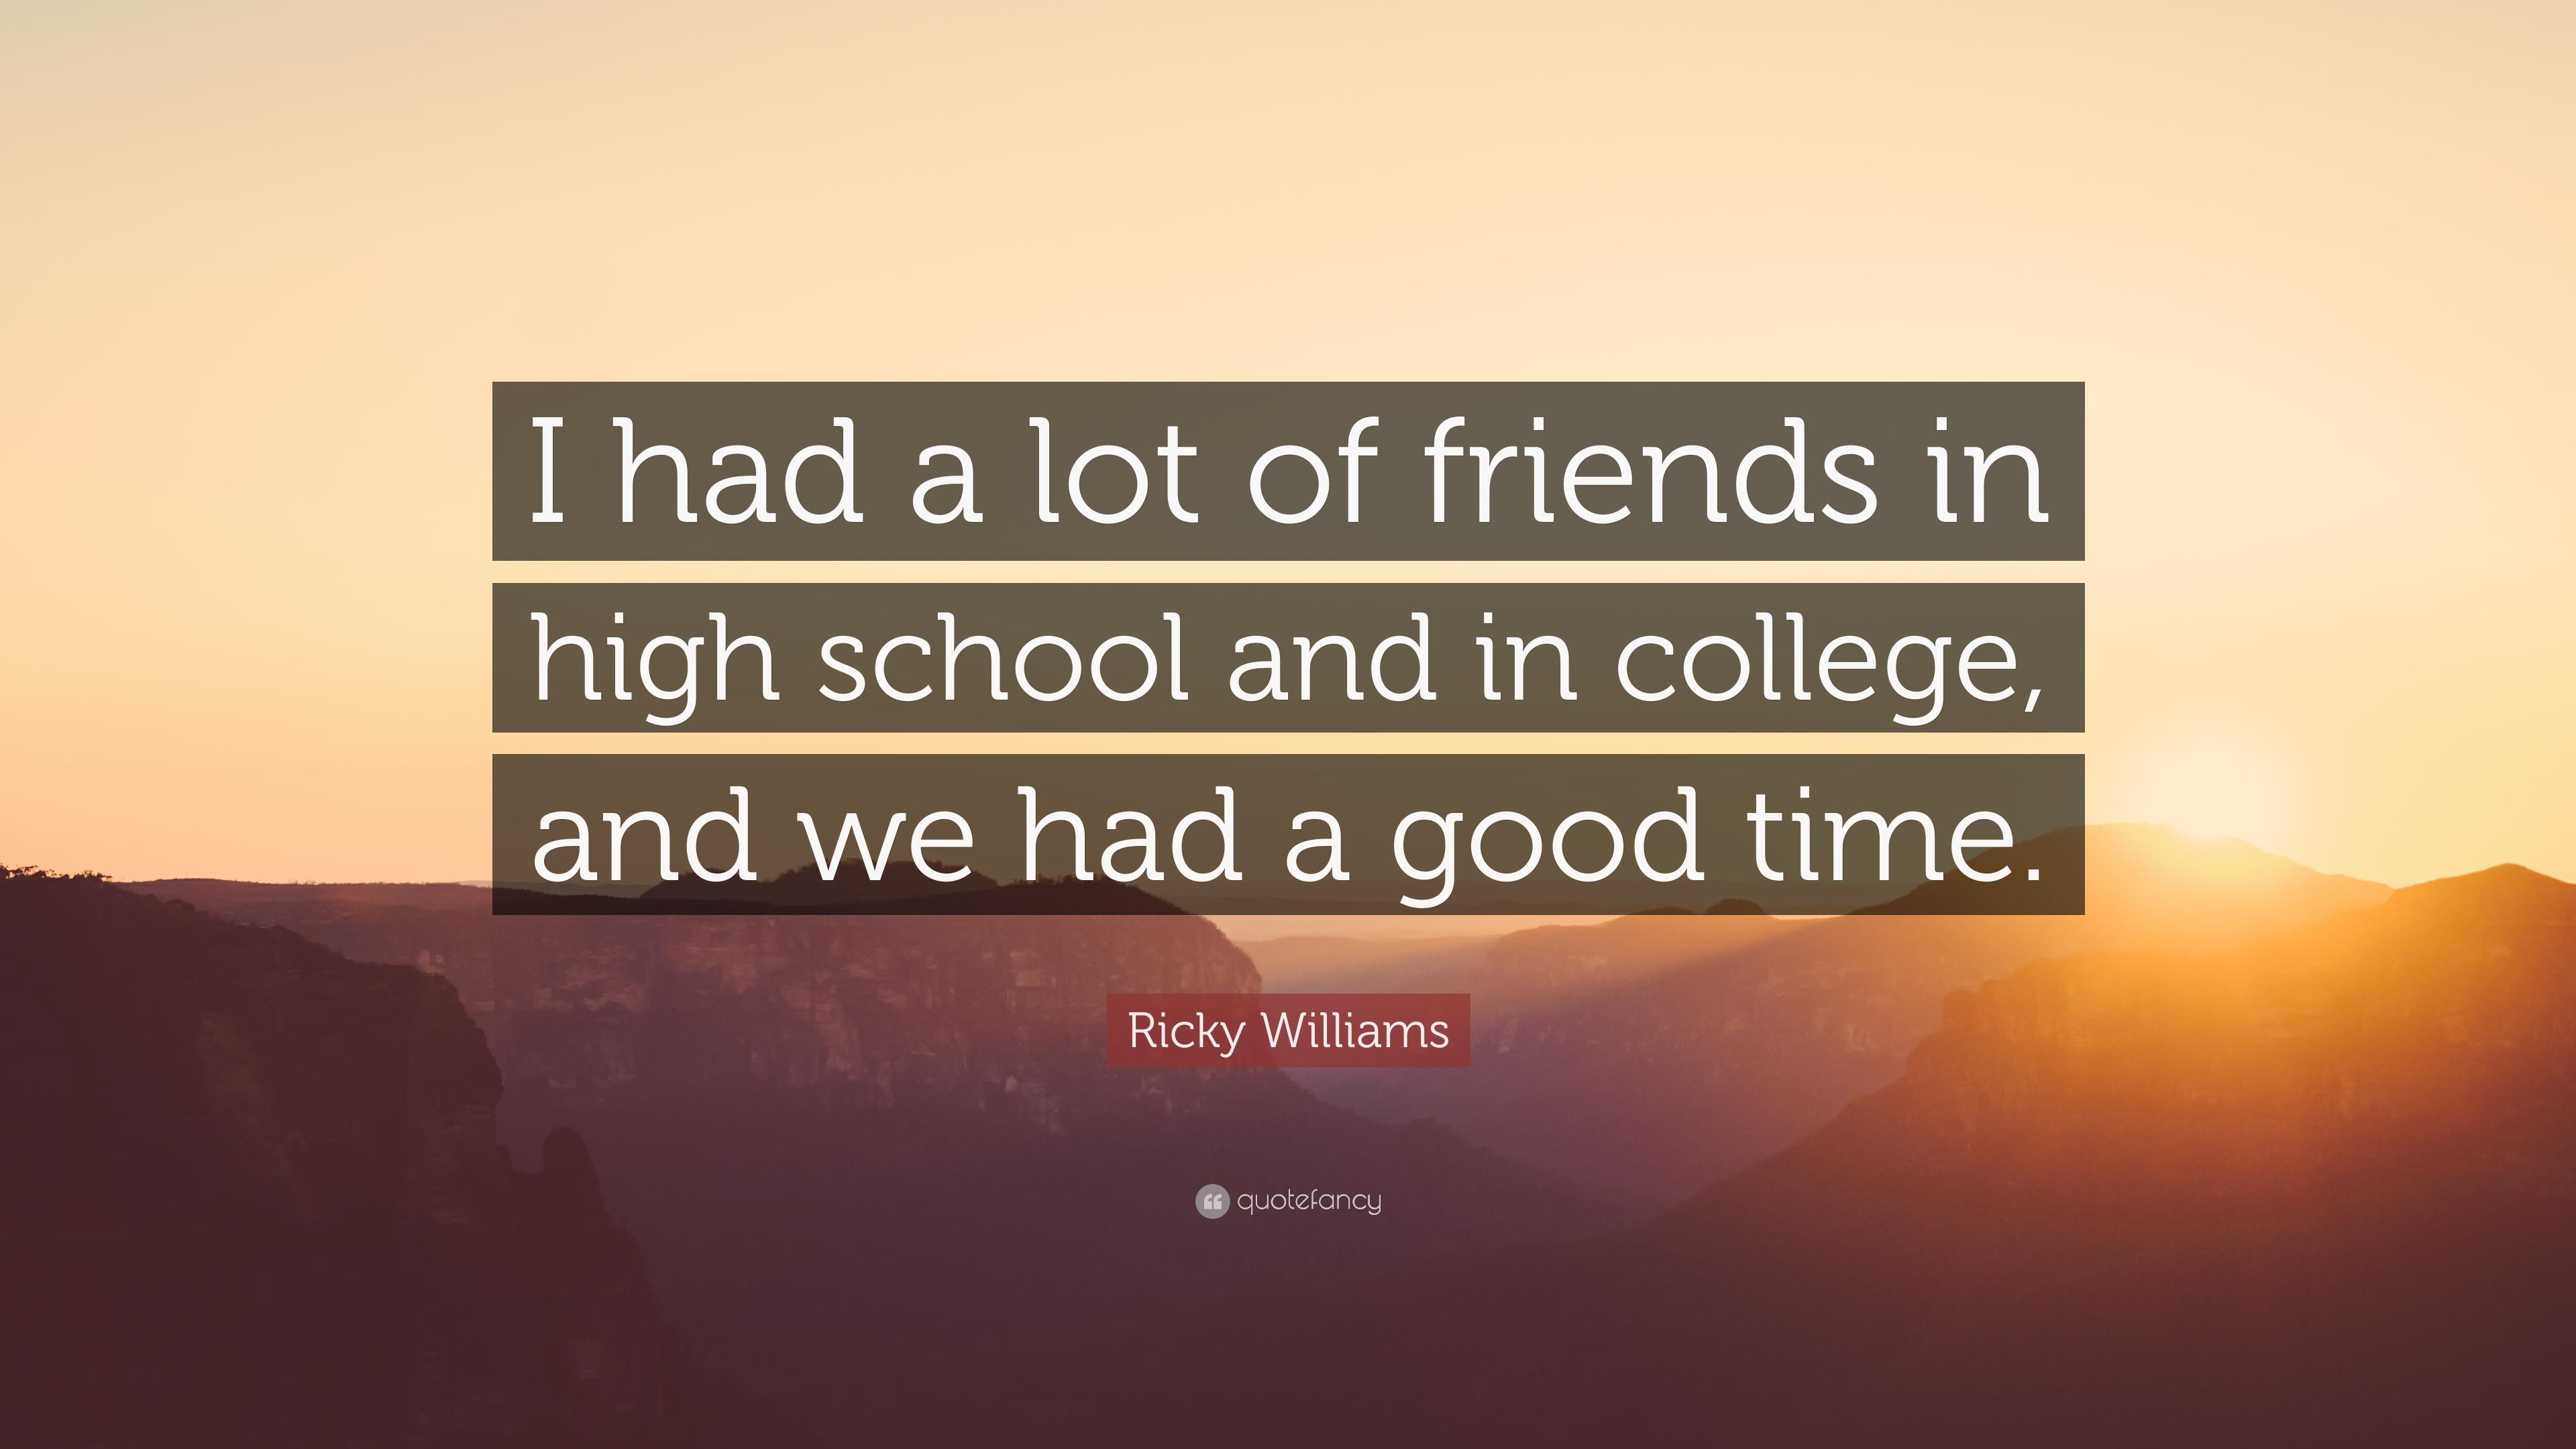 Ricky Williams Quote: “I had a lot of friends in high school and